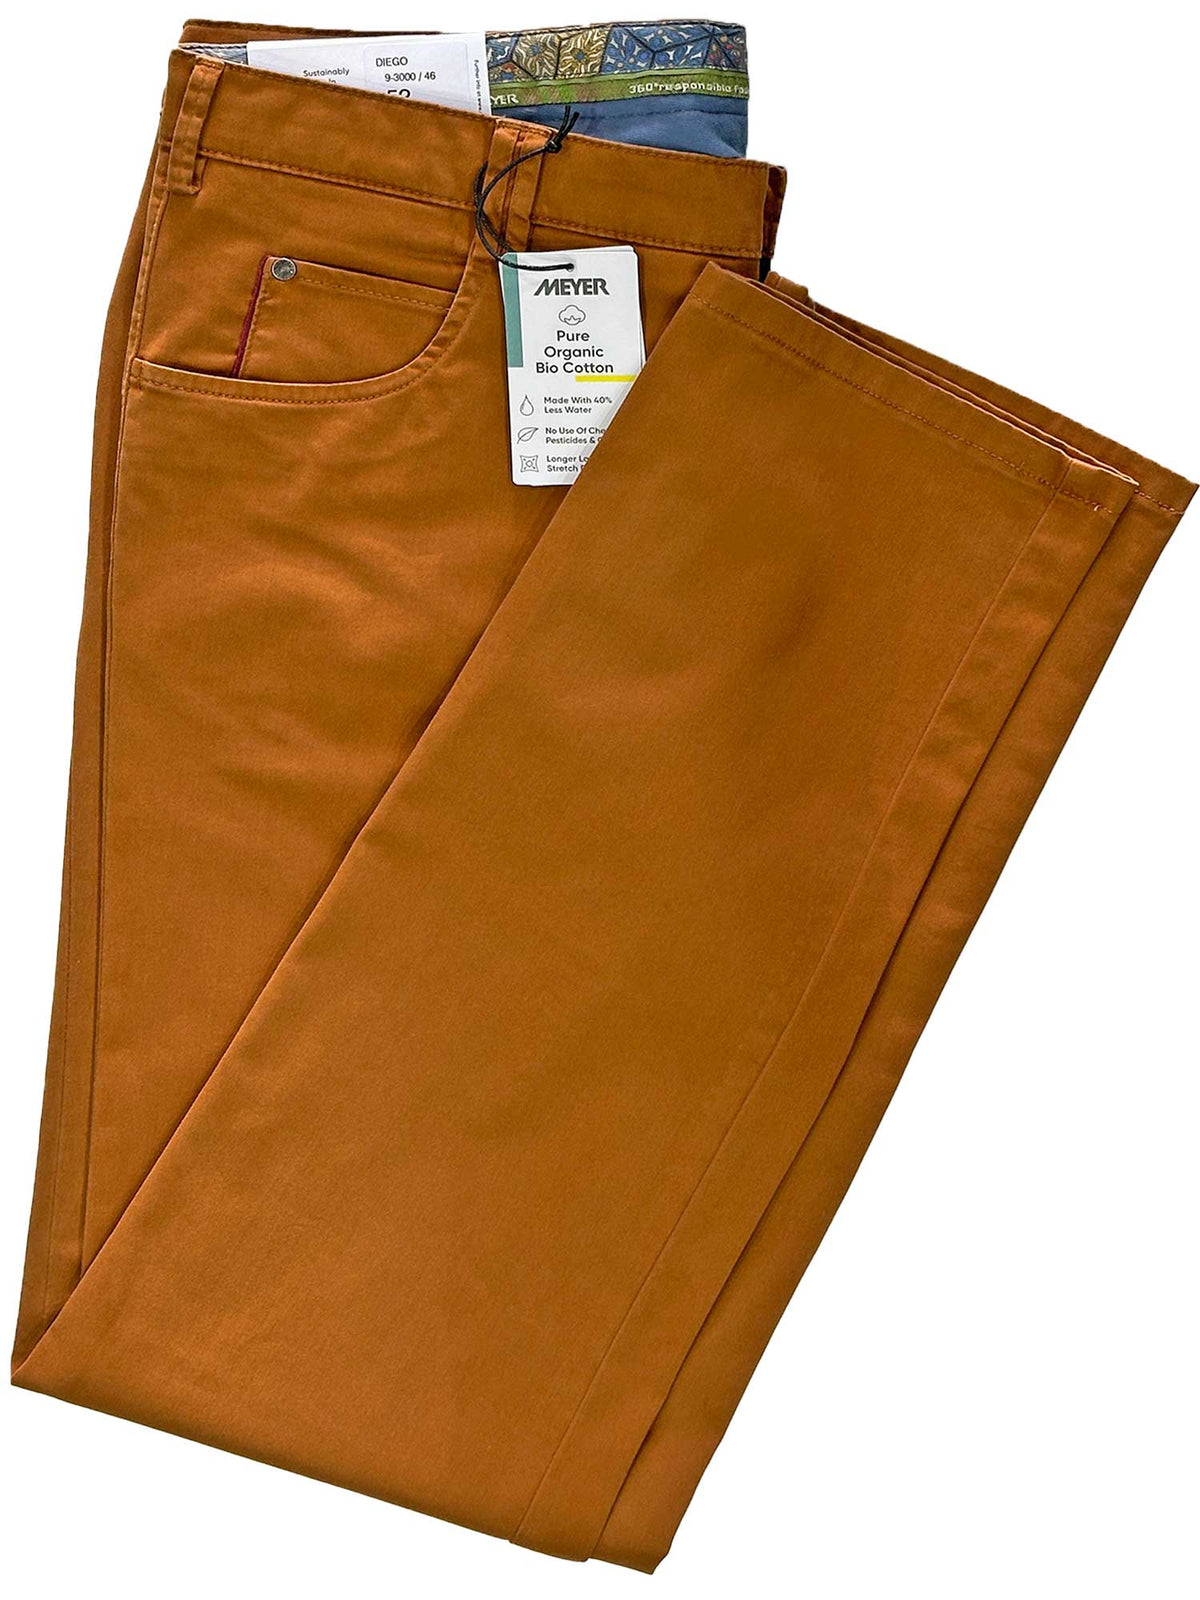 Meyer Diego 3000  https://harrysformenswear.com.au/products/meyer-diego-3000-46  These unique Diego MEYER trousers have a first-class fit and an authentic design. The special super stretch outer fabric provides invisible comfort and colour fast, along with the elastic waistband. Special details like high-quality buttons, exquisite inner lining, safety pouch in the left pocket and coordinating belt …